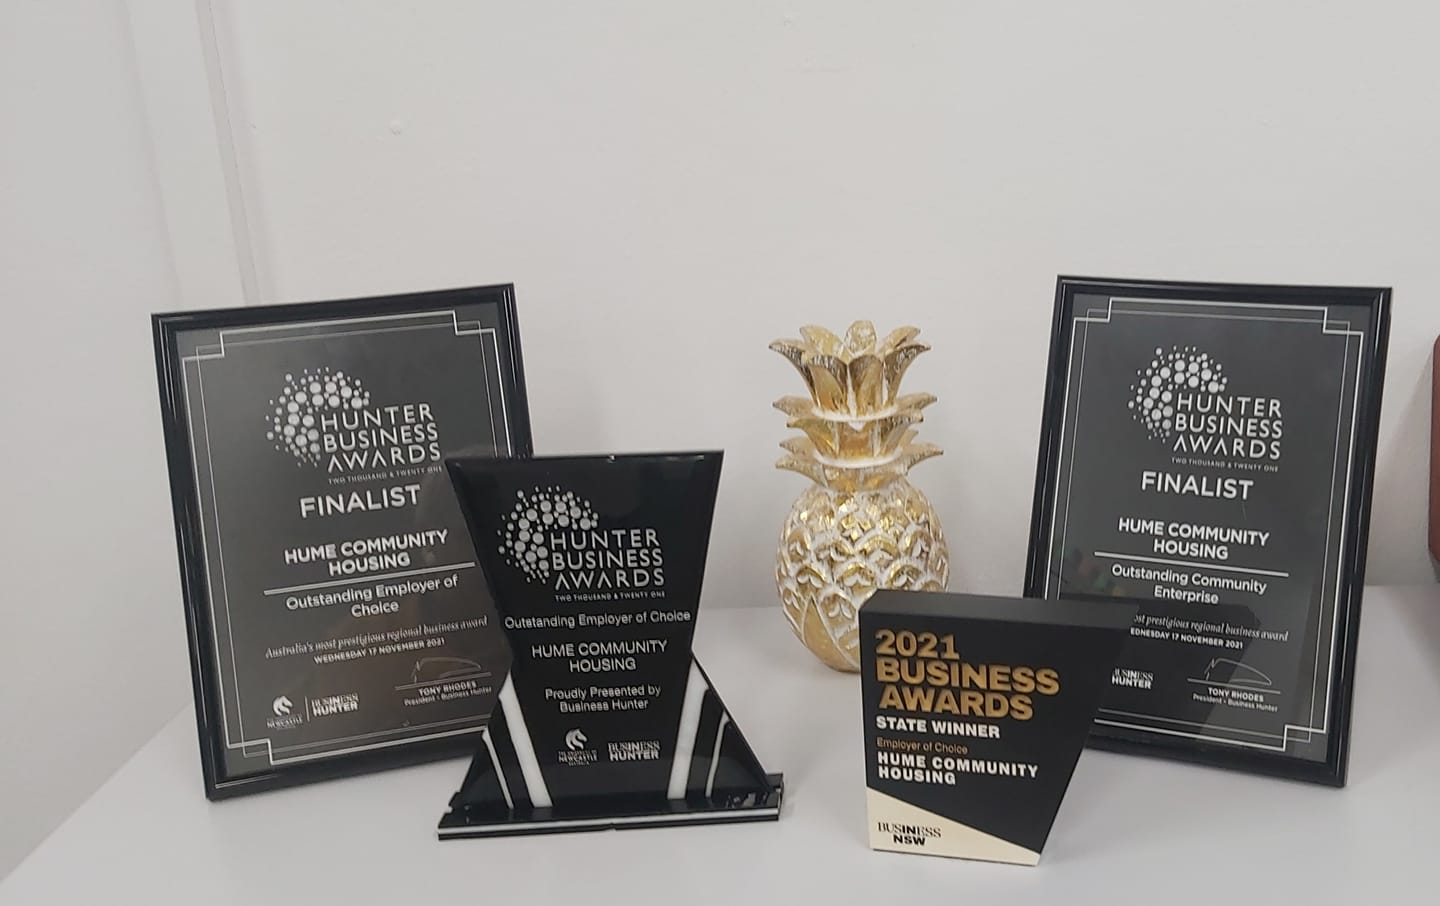 Two plaques from the Hunter Business Awards, a trophy from the Hunter Business Awards, a trophy from the NSW Business Awards, and a pineapple-shaped trophy from the Hunter Diversity and Inclusion Awards.